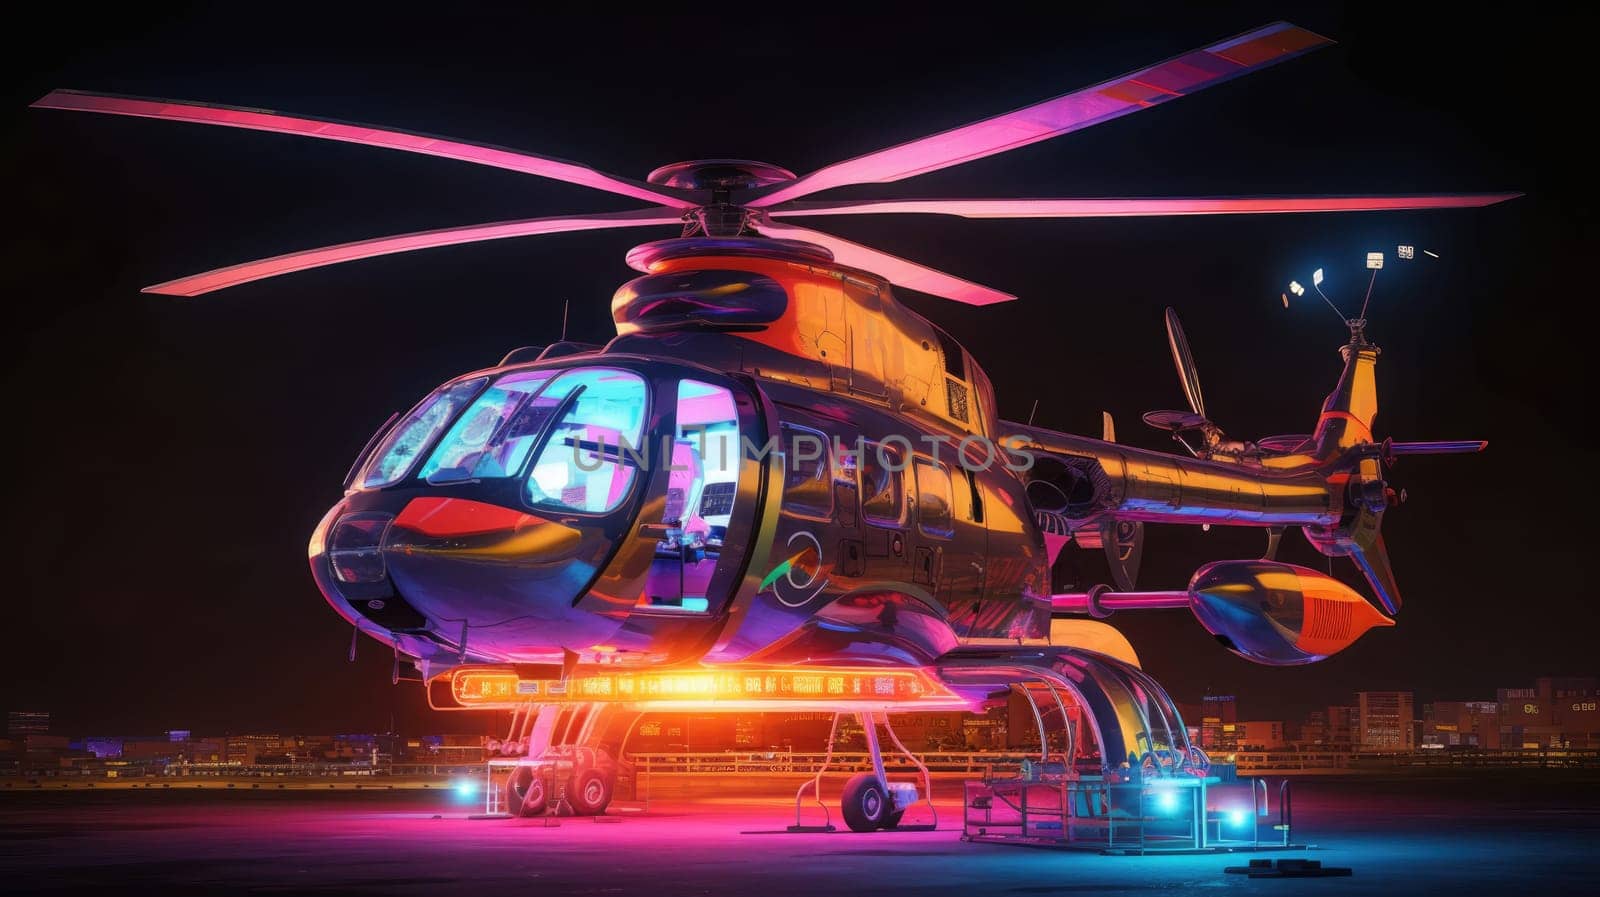 Futuristic helicopter with neon lights in a cyberpunk style. Isolated on black background, great for websites, presentations, and social media. Ideal for futuristic projects.